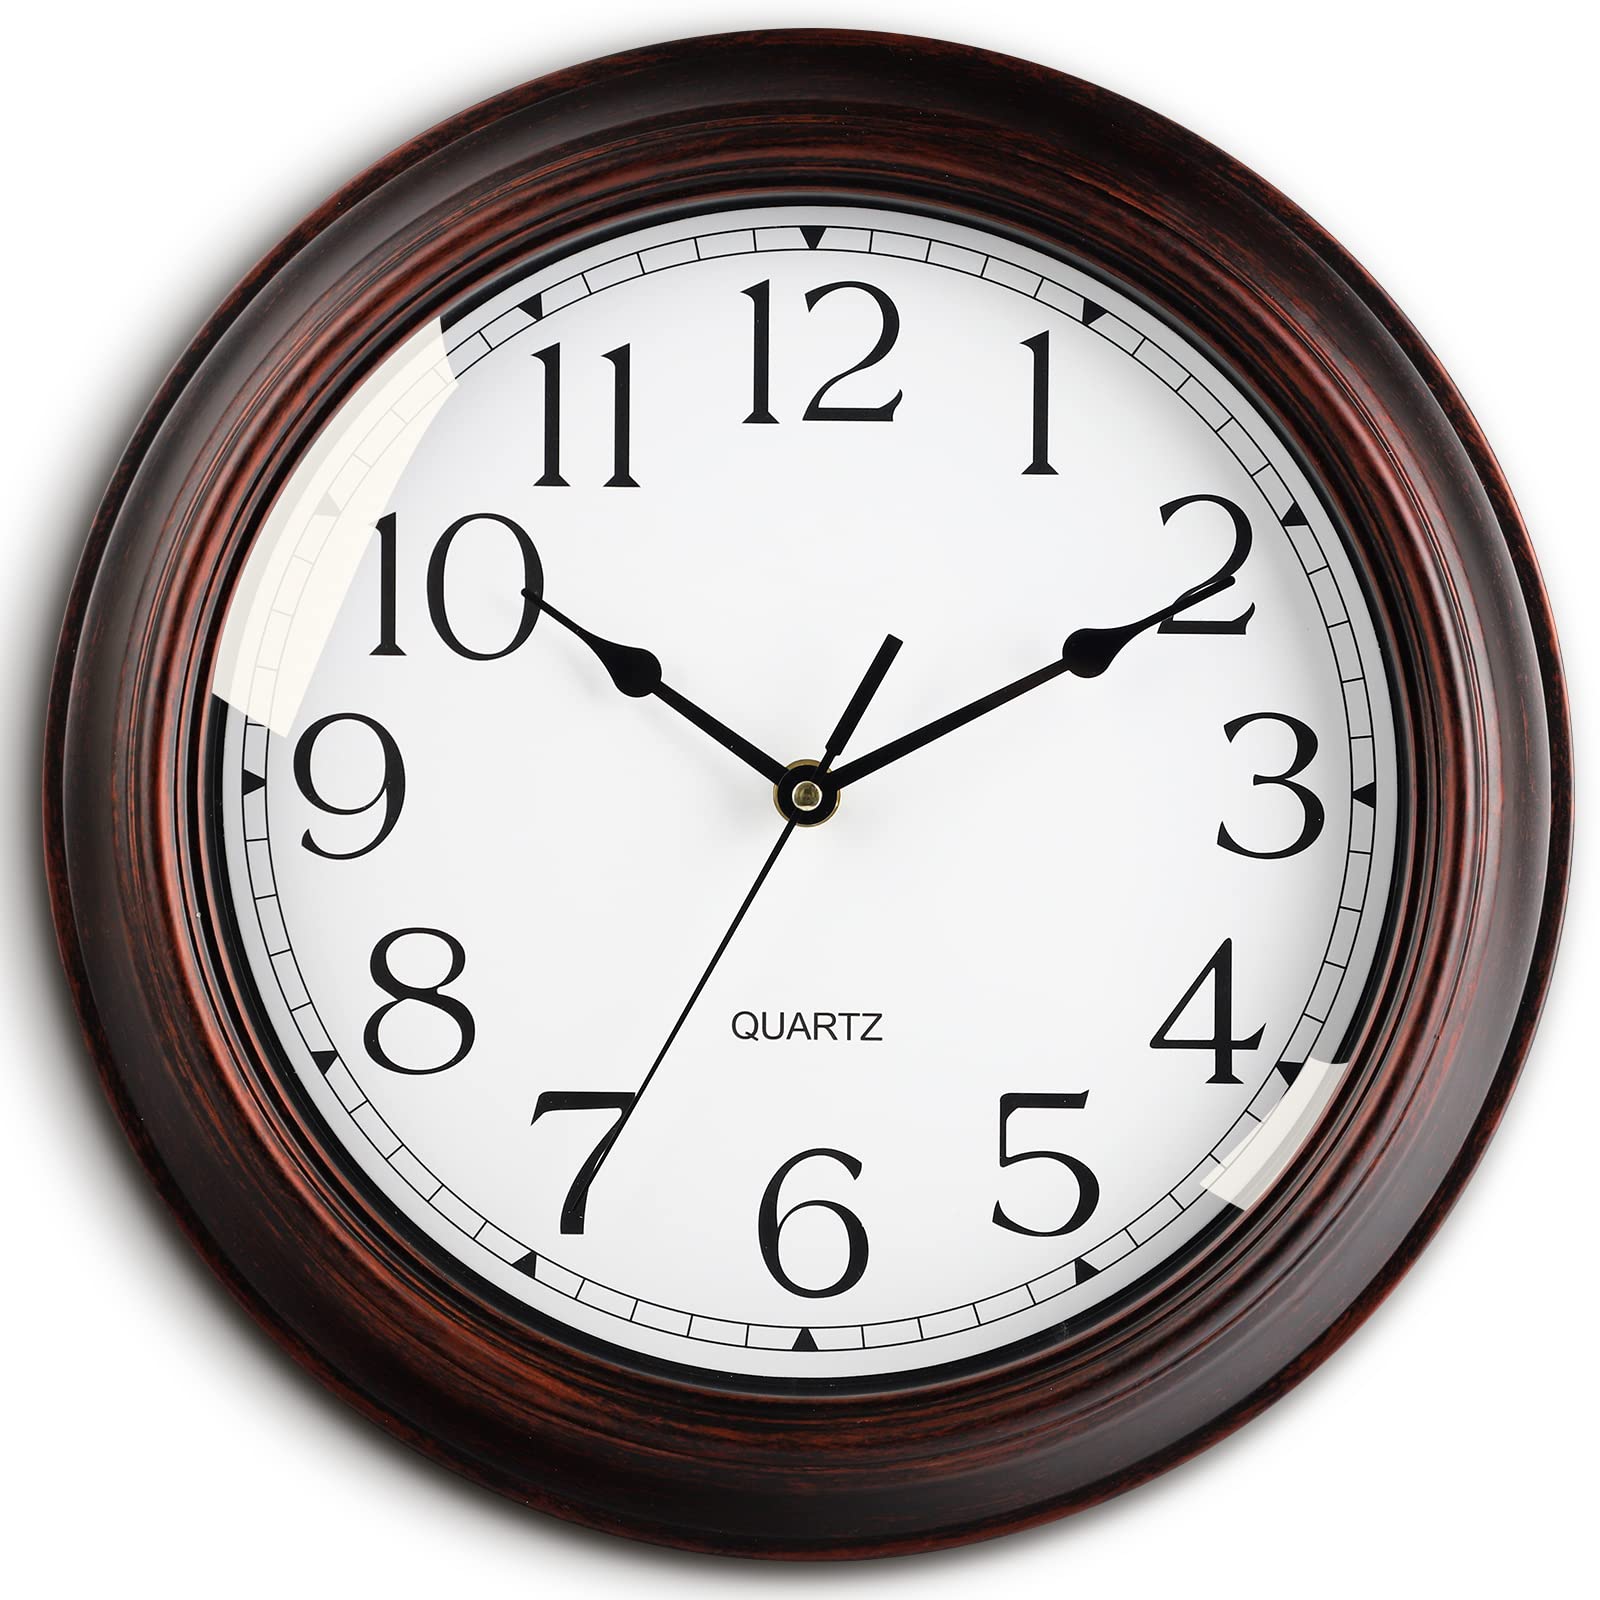 Battery Operated Silent Non-Ticking Wall Clock 8.5 inch Vintage Retro Rustic Style (Bronze) - $5 FS w/prime